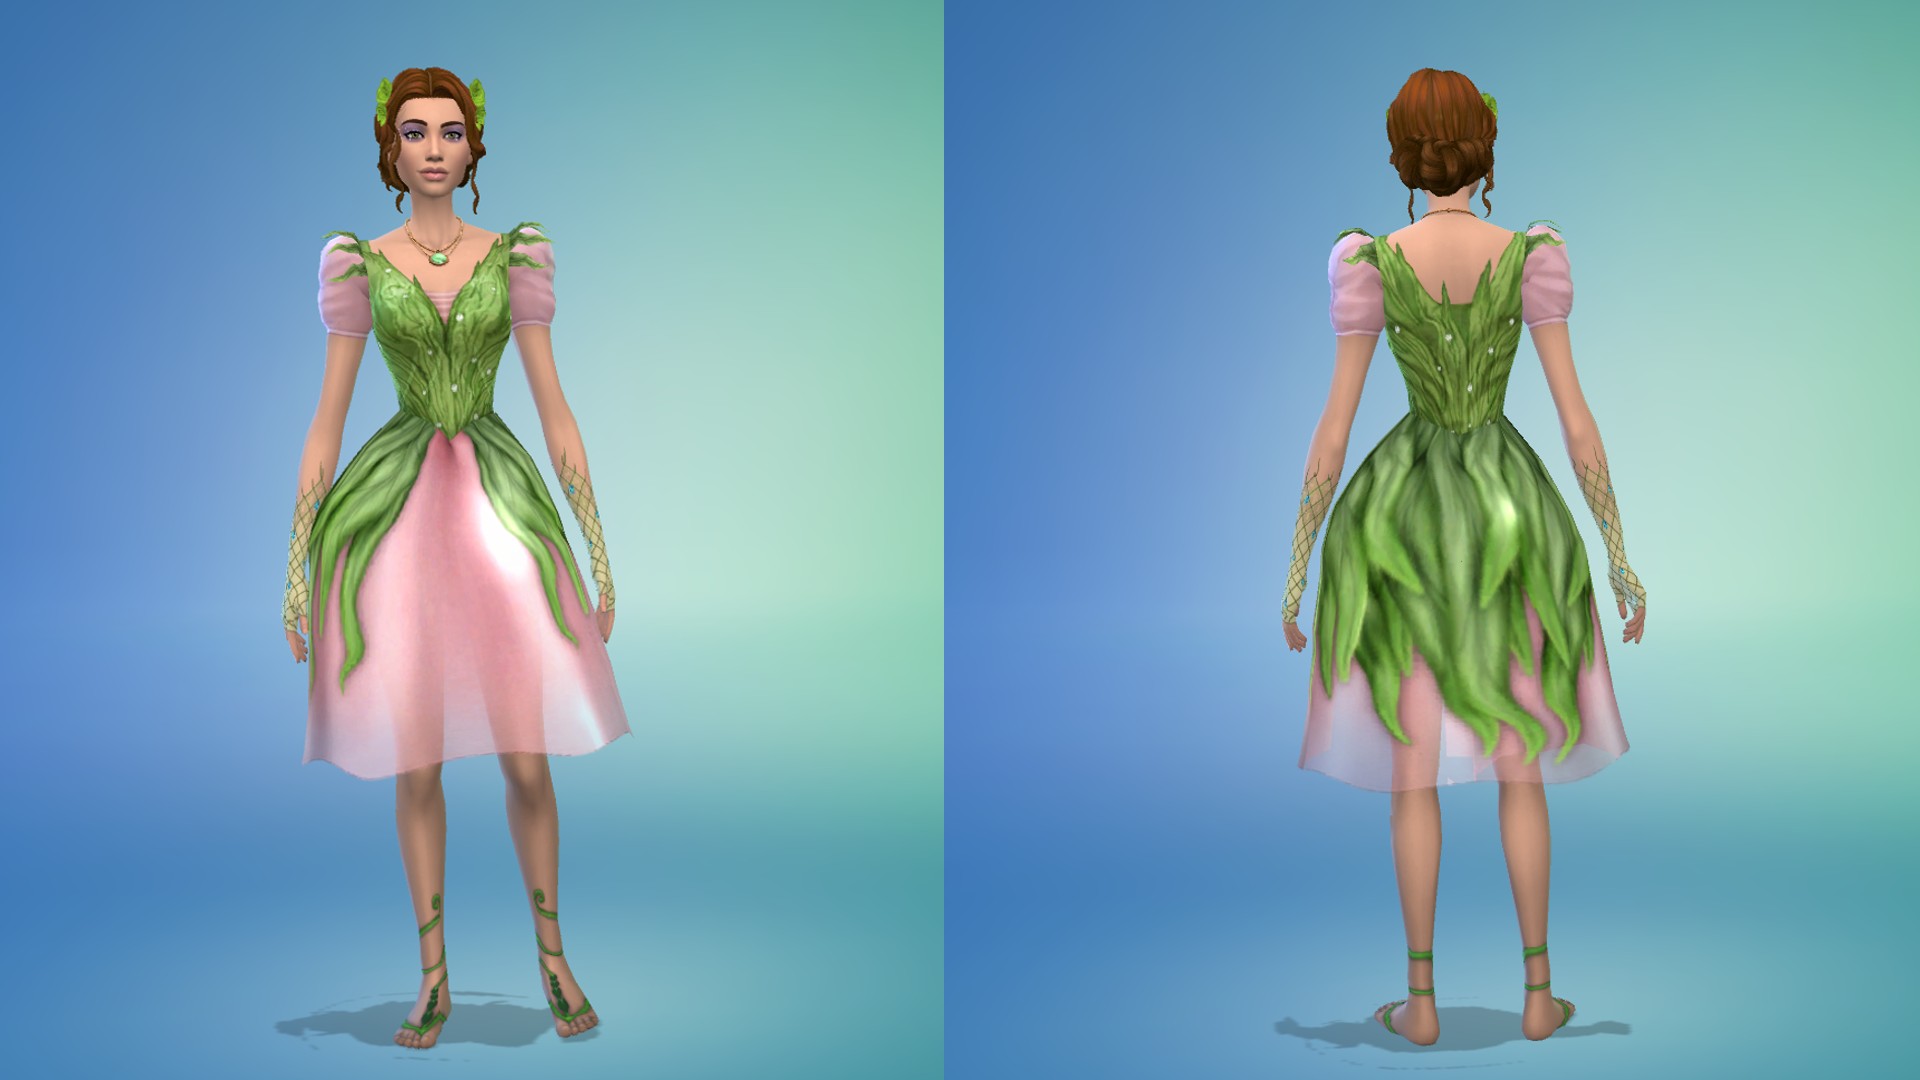 The Sims 4 cottage cottage fae dress mod